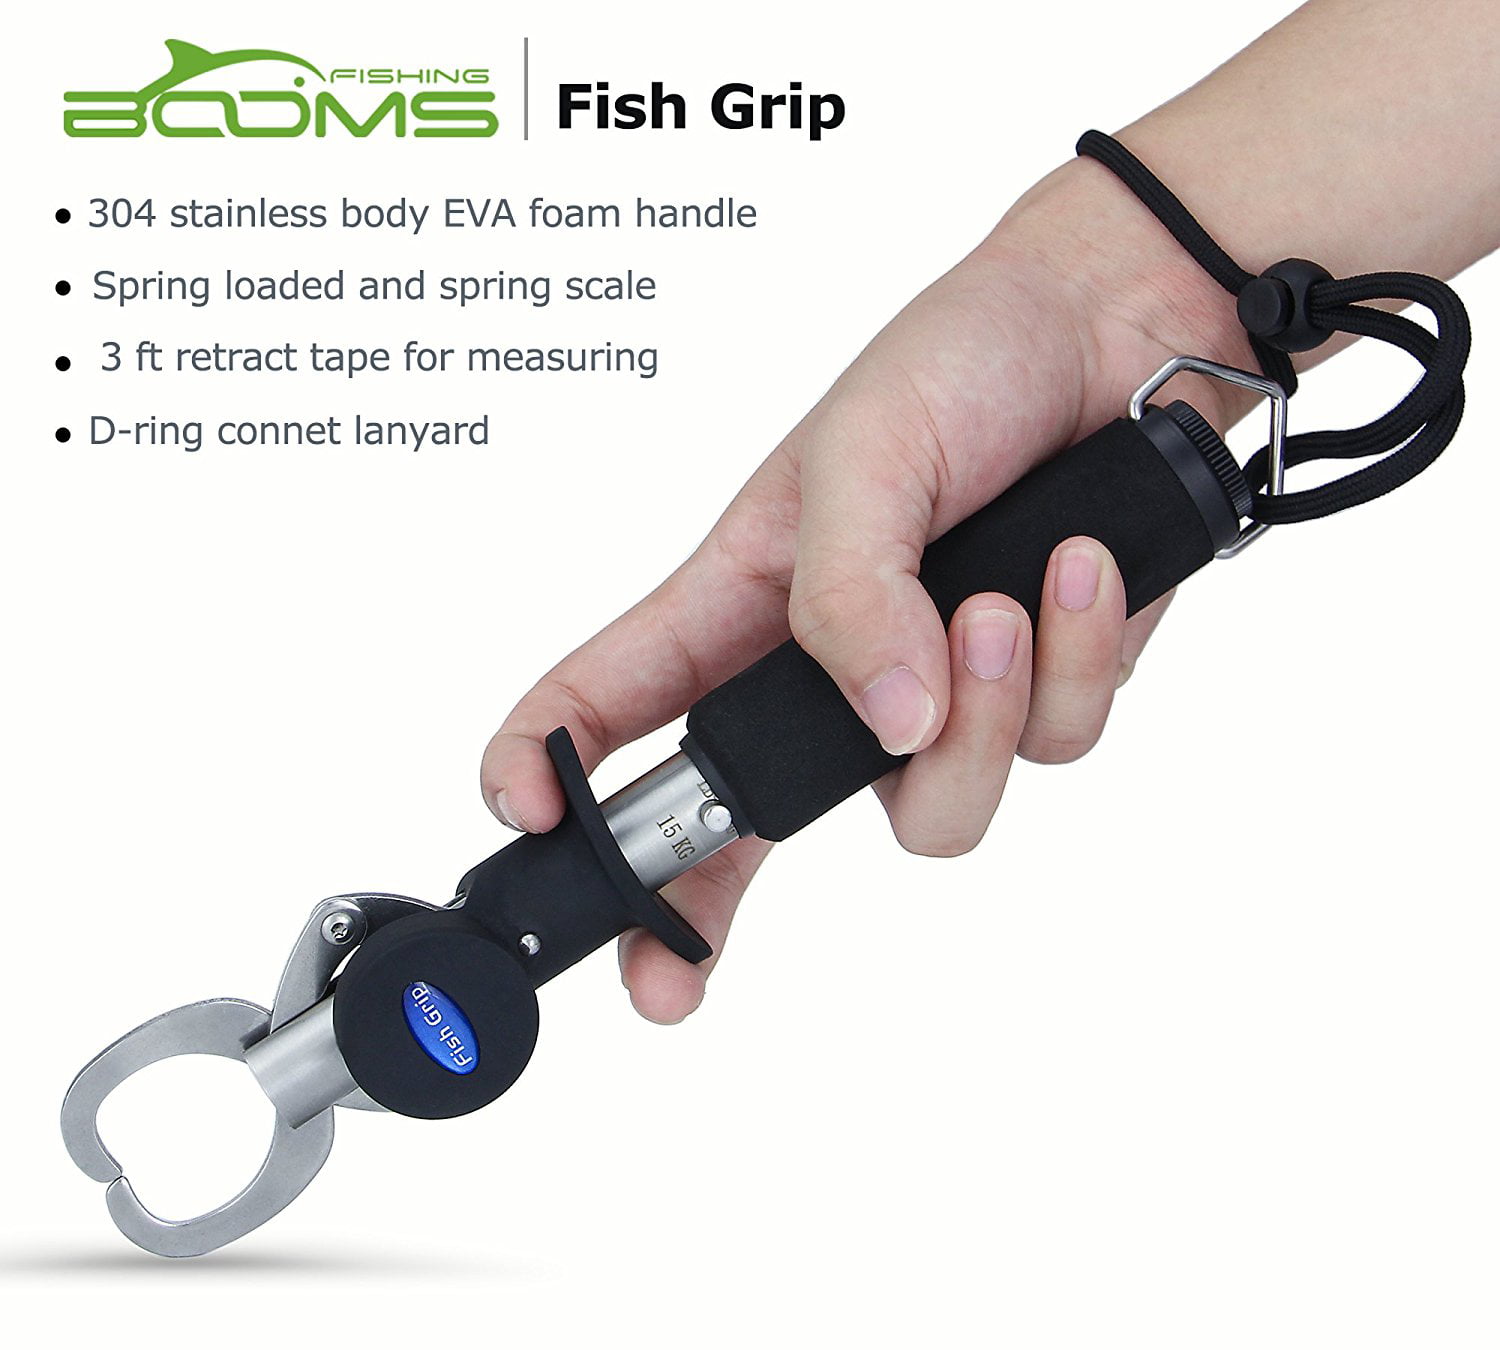 Booms Fishing G1 Fish Gripper Grip and Hold with Tight 3 Sizes Available 